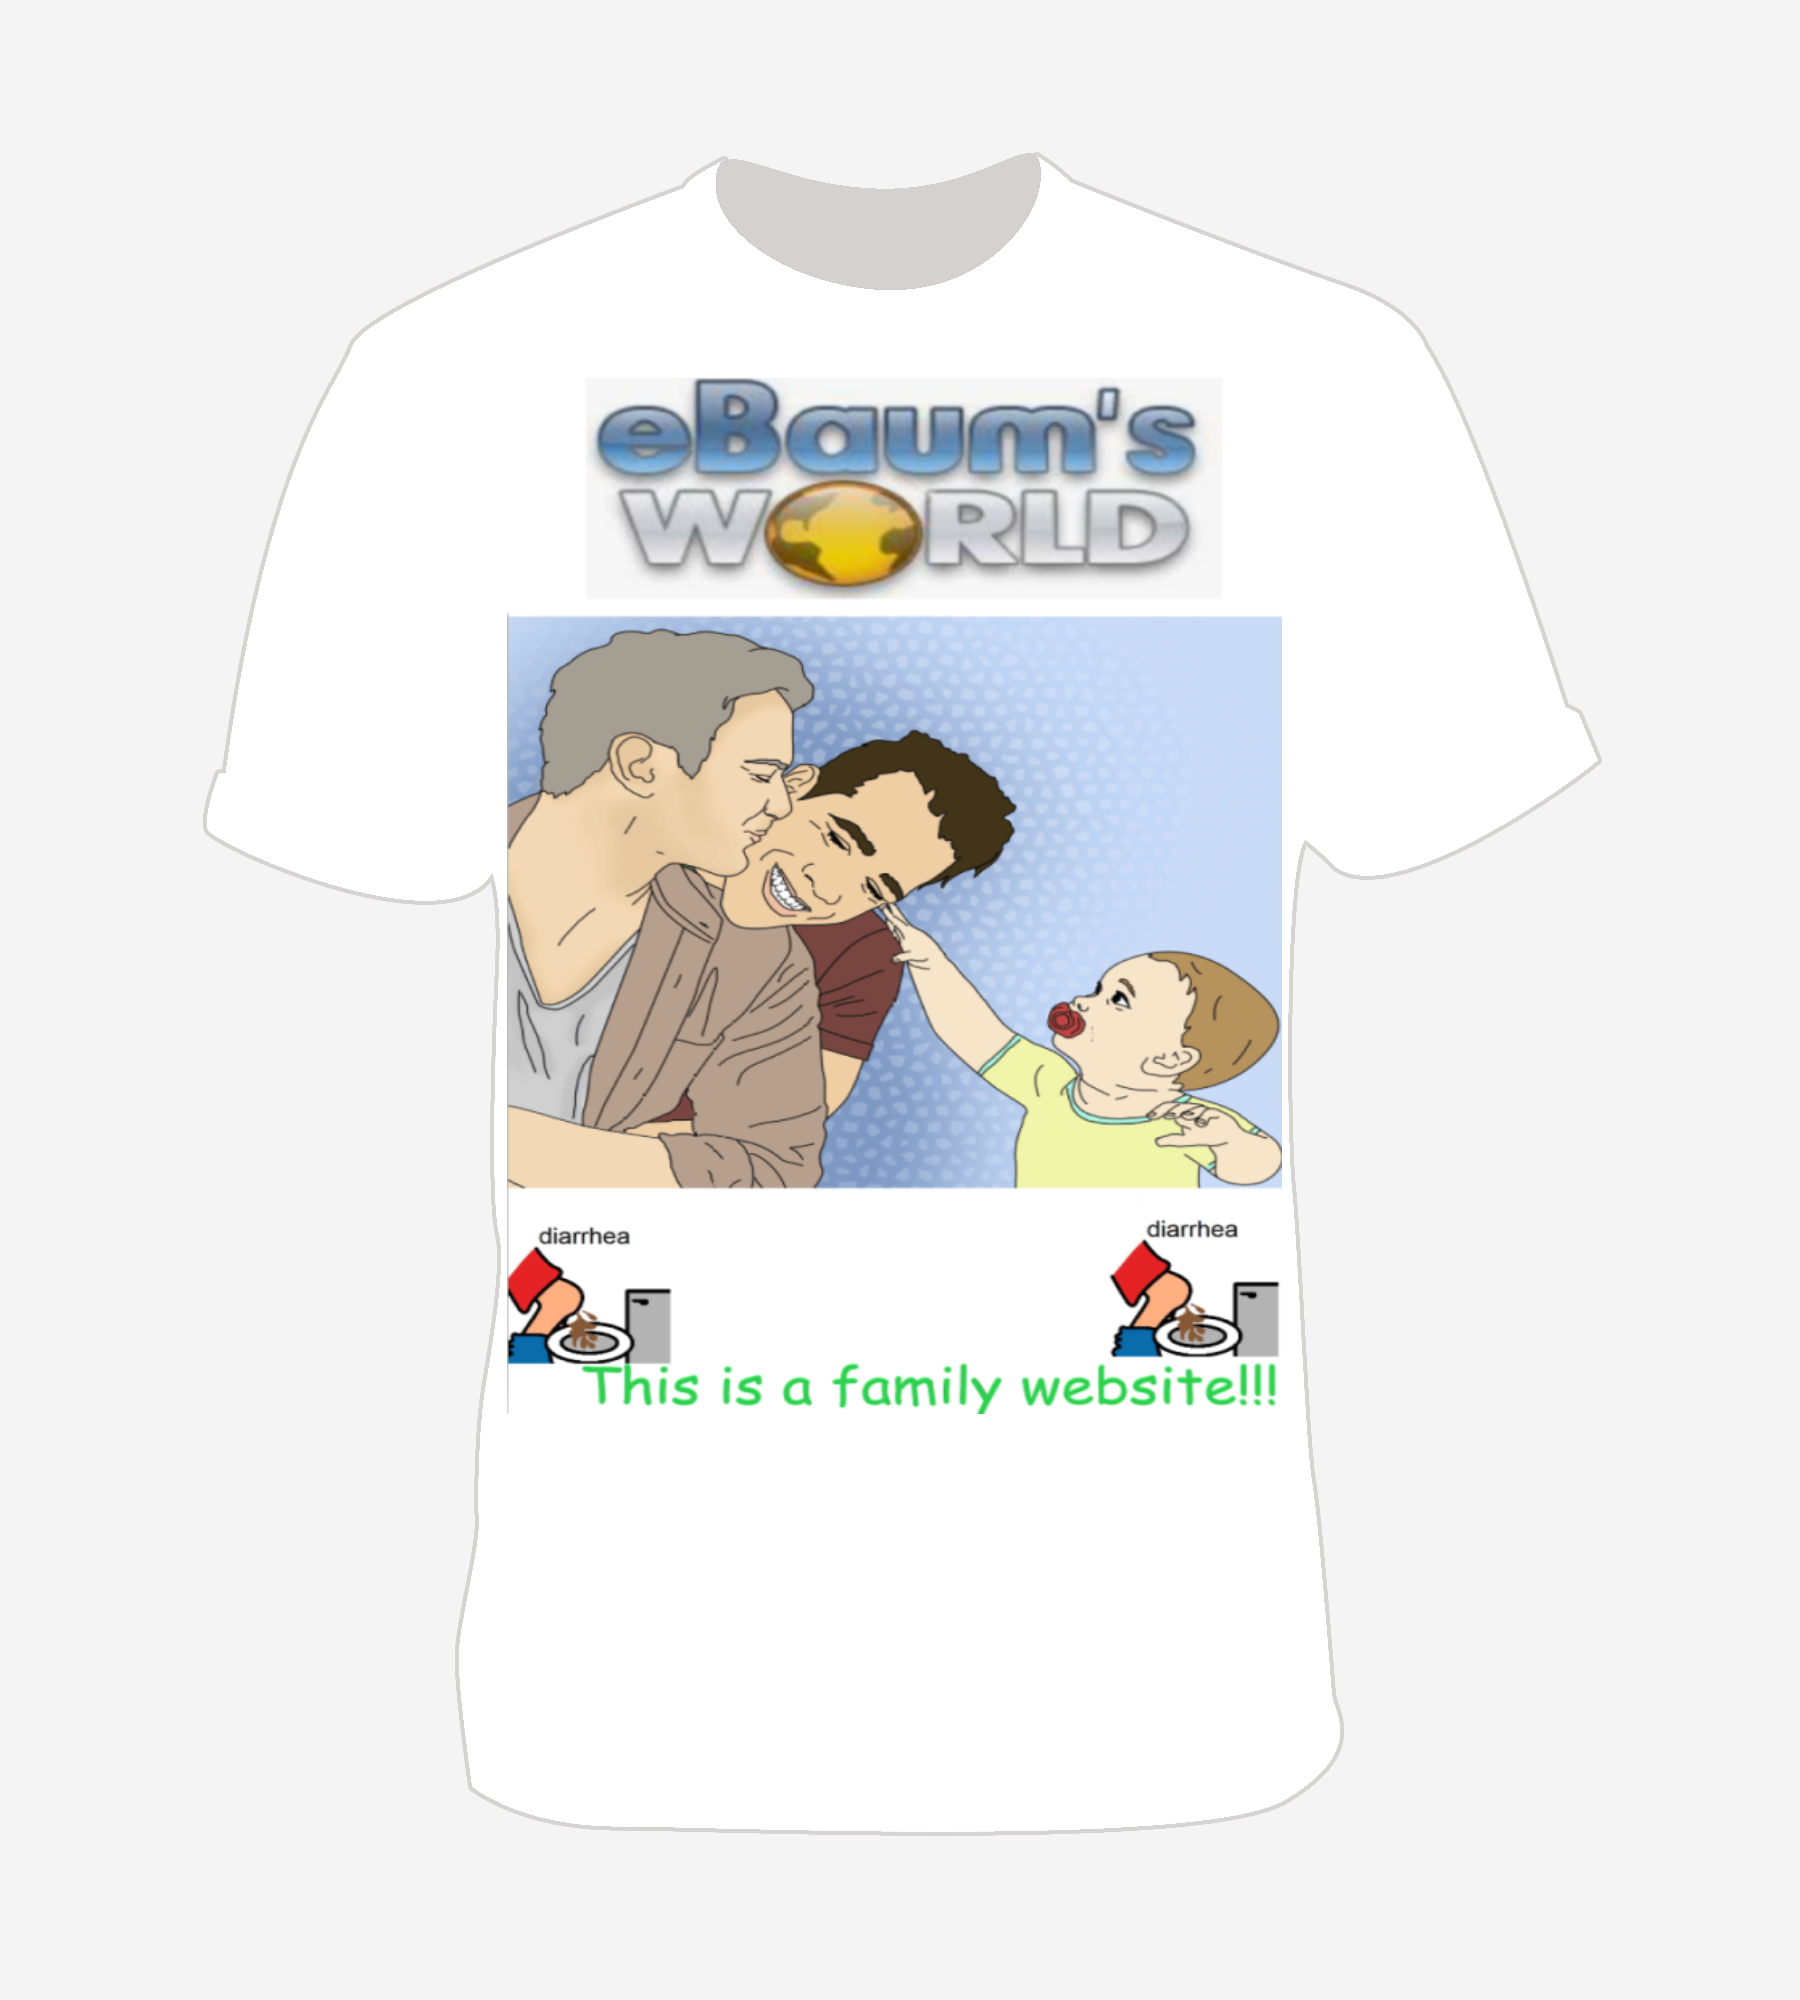 This is a family website